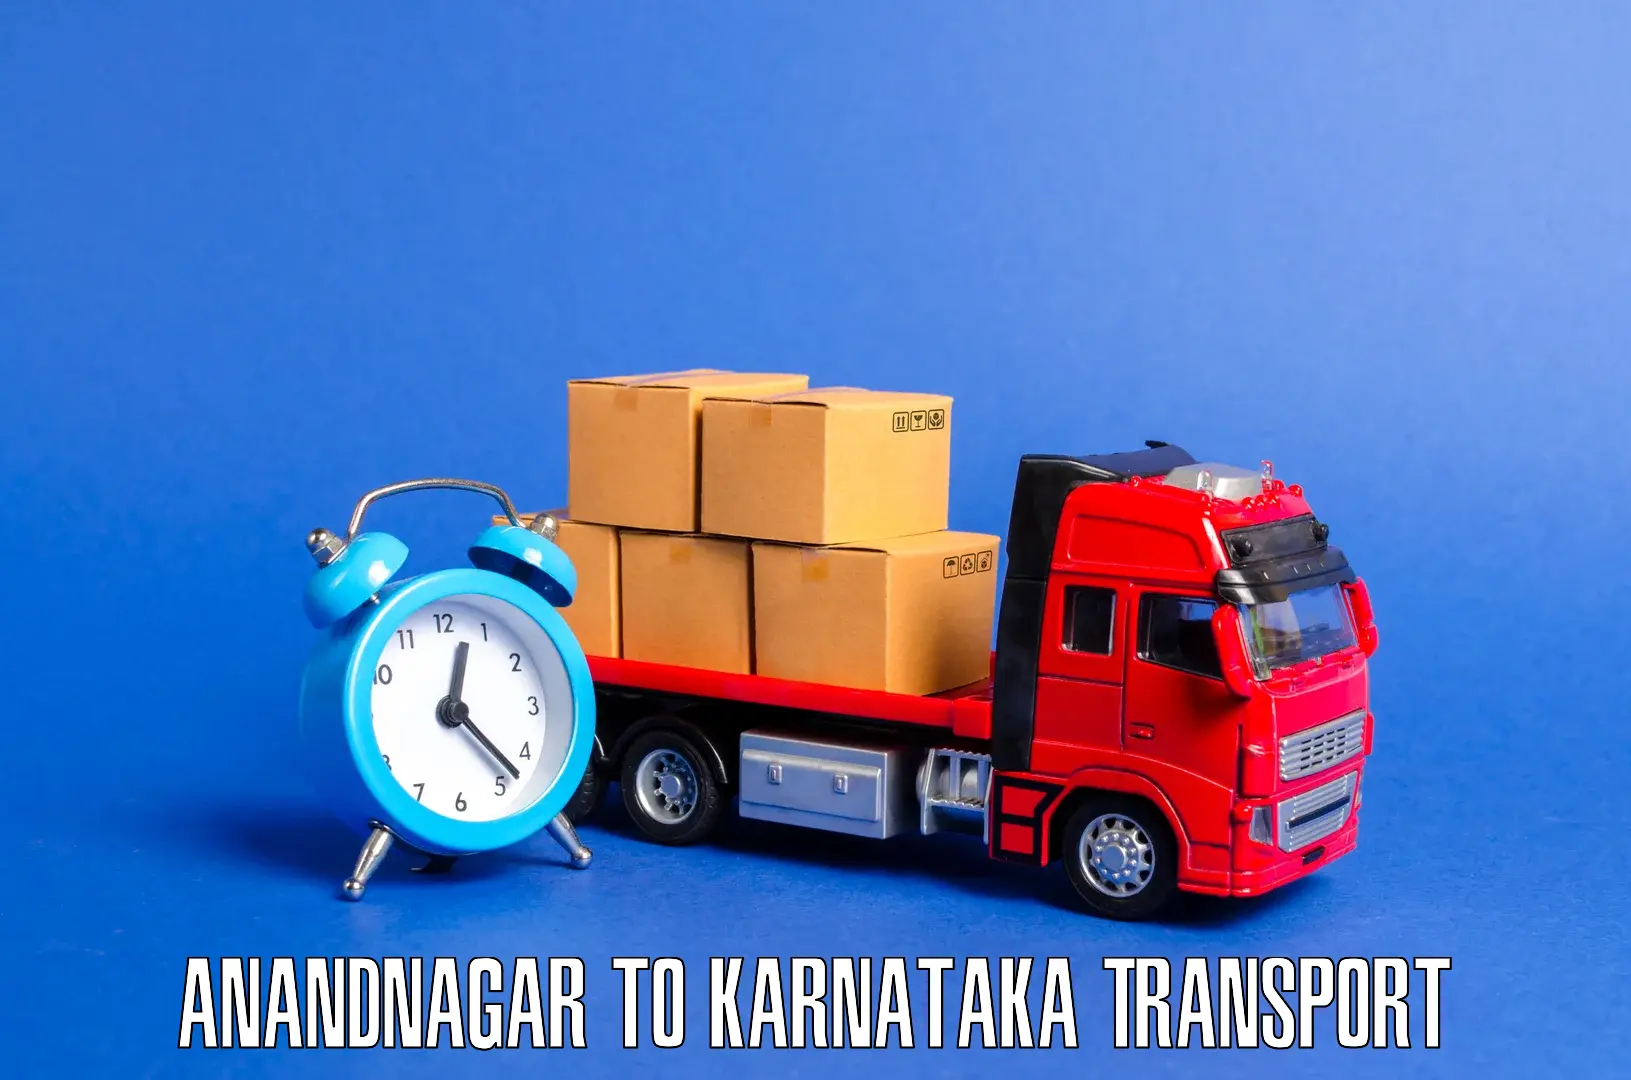 Truck transport companies in India Anandnagar to Manipal